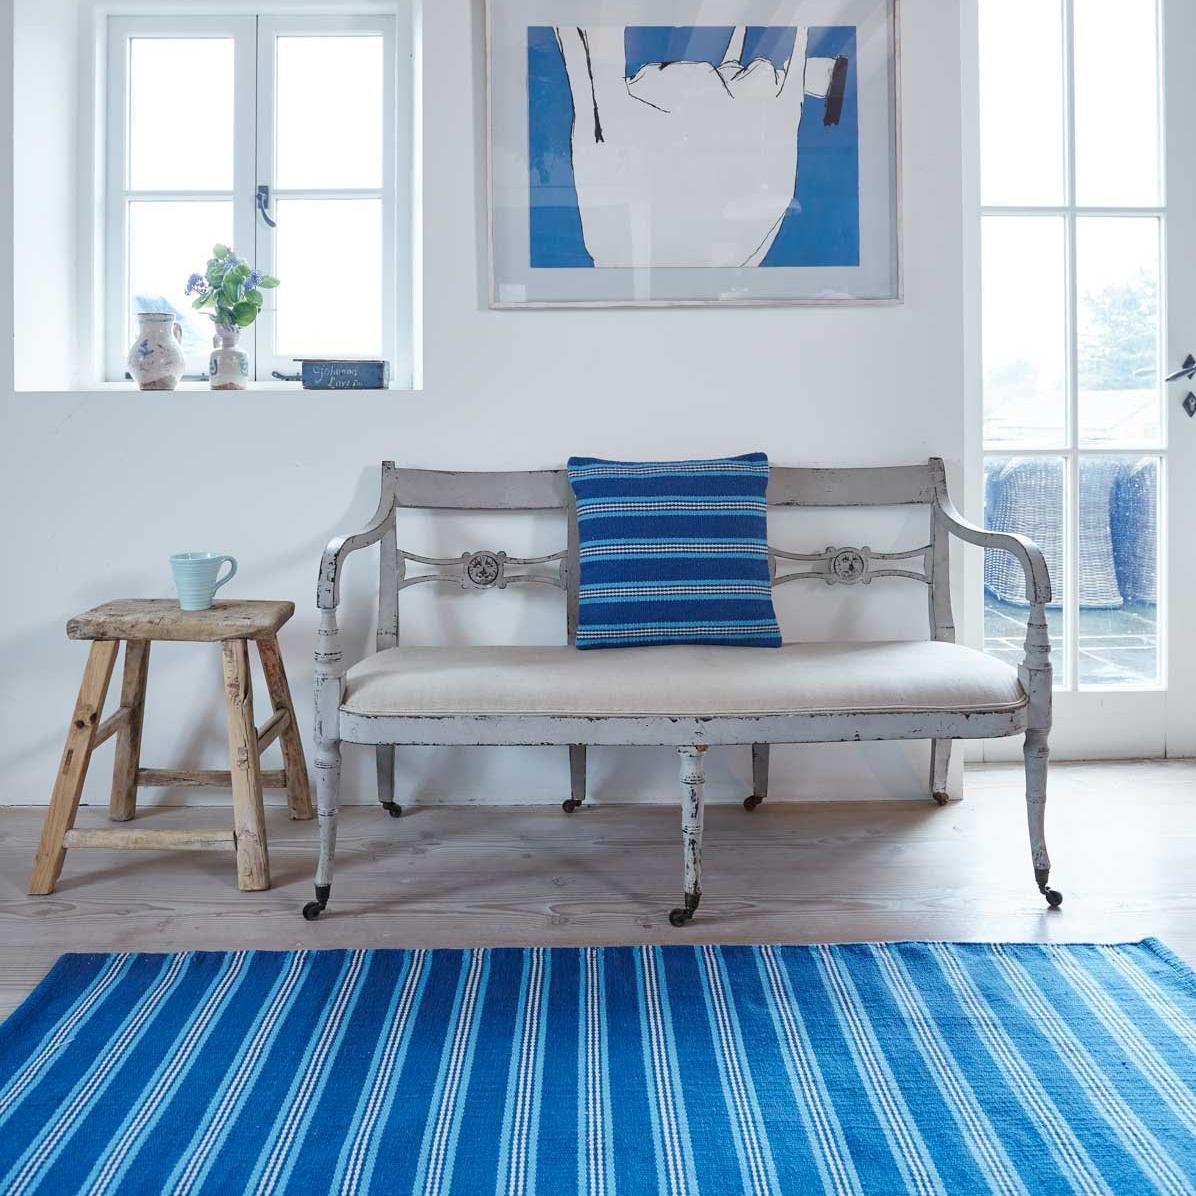 Santorini Henley Stripe Rug with bench seat and matching cushion